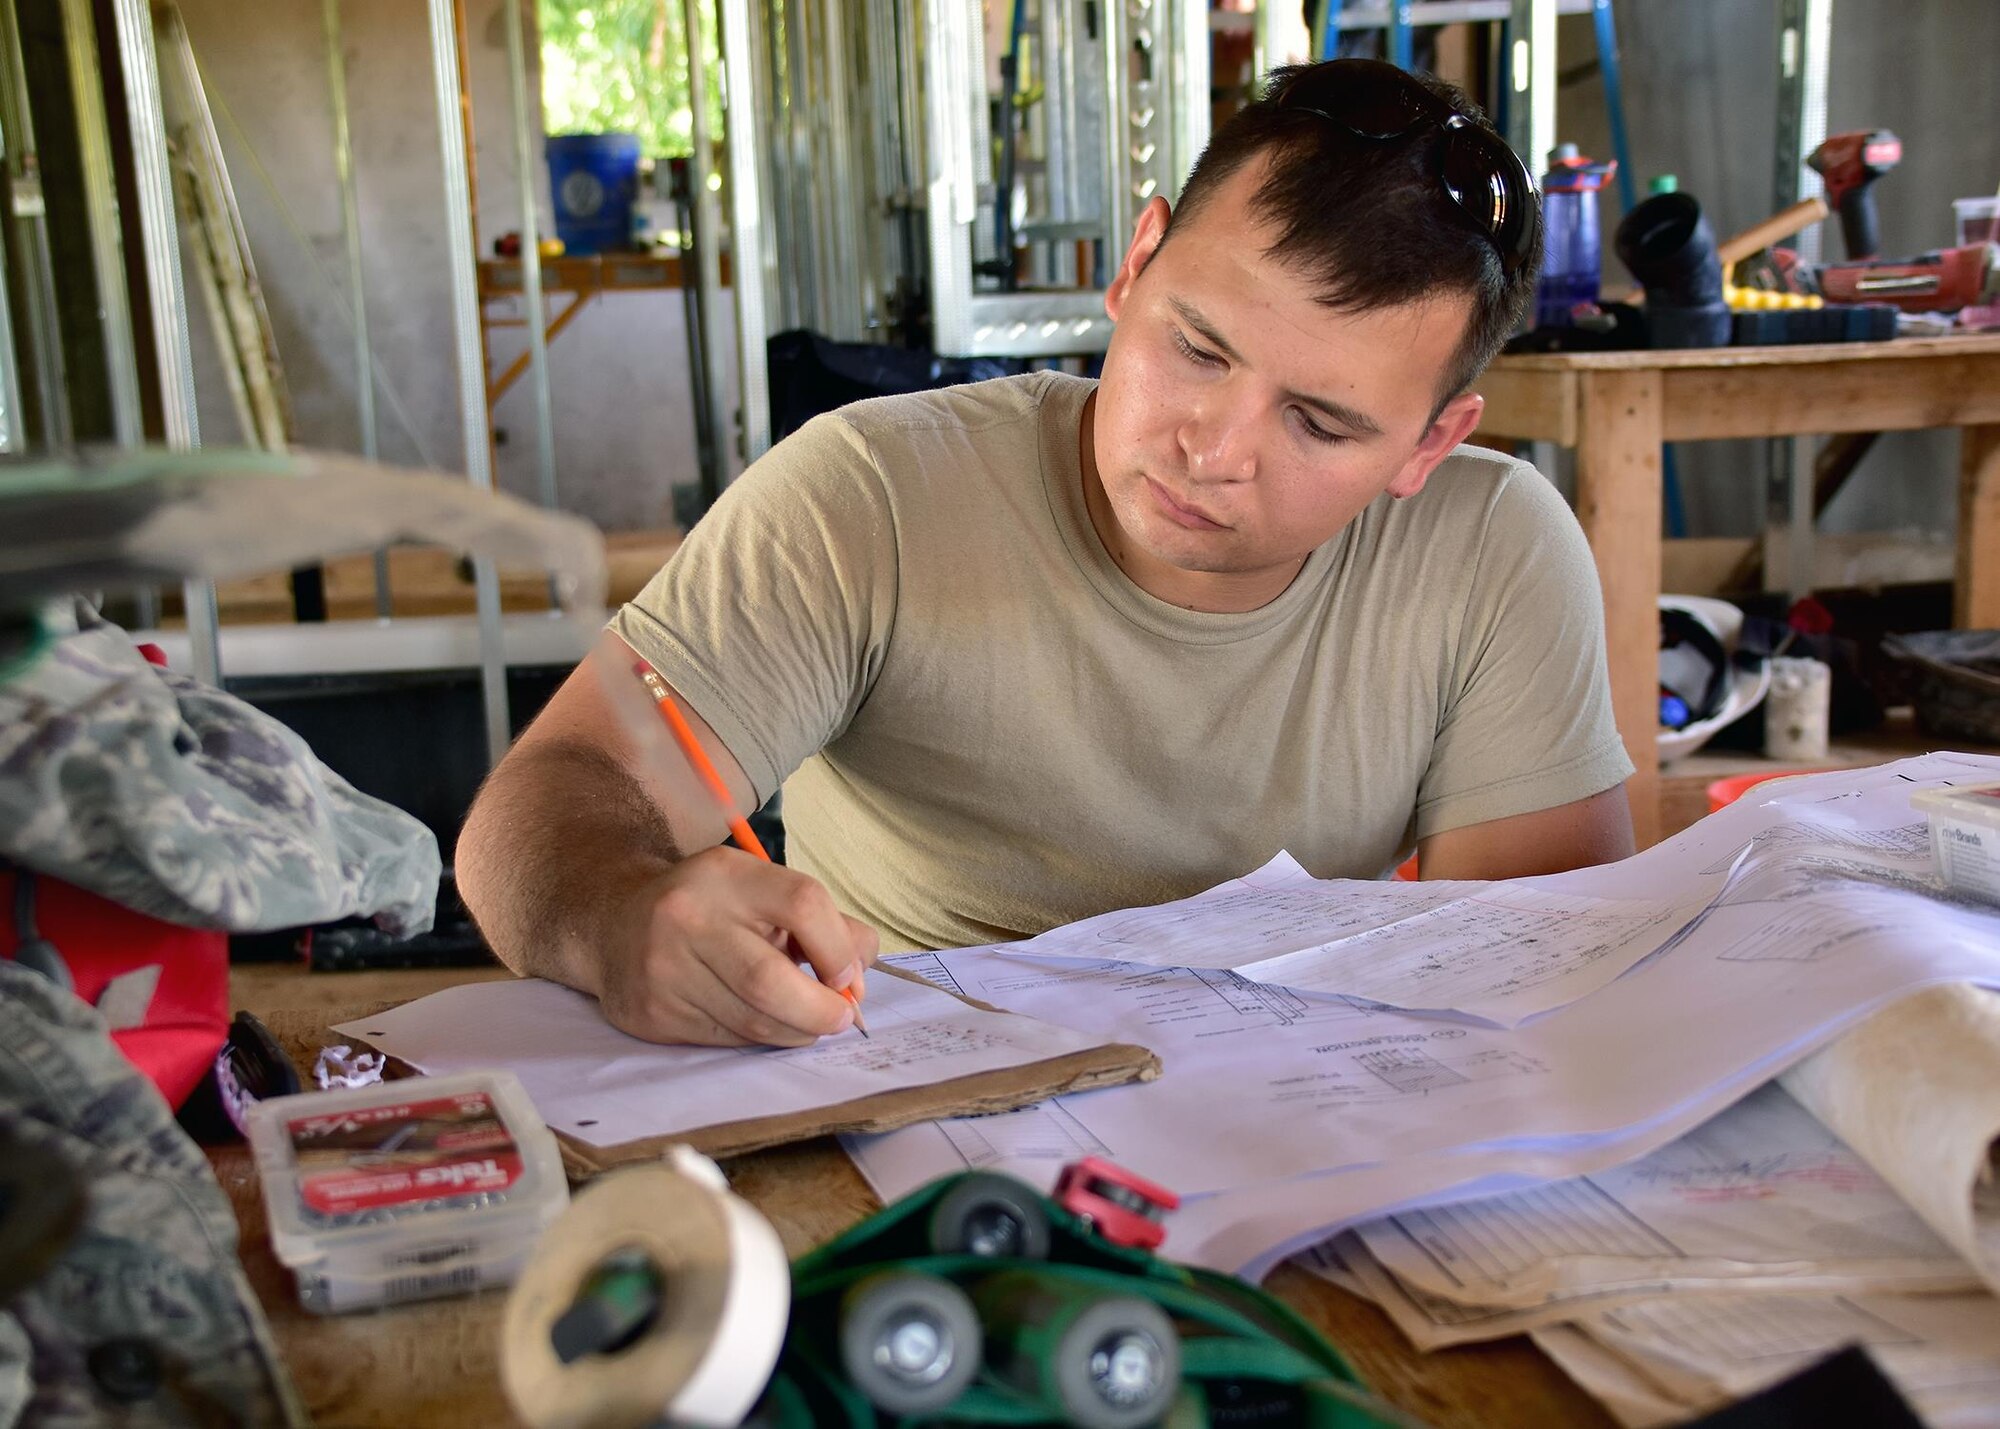 Staff Sgt. John Irving from the 143d Civil Engineering Squadron (CES), Rhode Island Air National Guard rinse creates a material list for electrical work in Inarajan, Guam during an Innovative Readiness Training (IRT) project on September 5, 2016.  The IRT project, in conjunction with Habitat for Humanity Guam is to provide two homes for residents in Inarajan.  The members are part of a 36 Airmen crew from a cross section of trades within the CES.  U.S. Air National Guard photo by Master Sgt. John V. McDonald